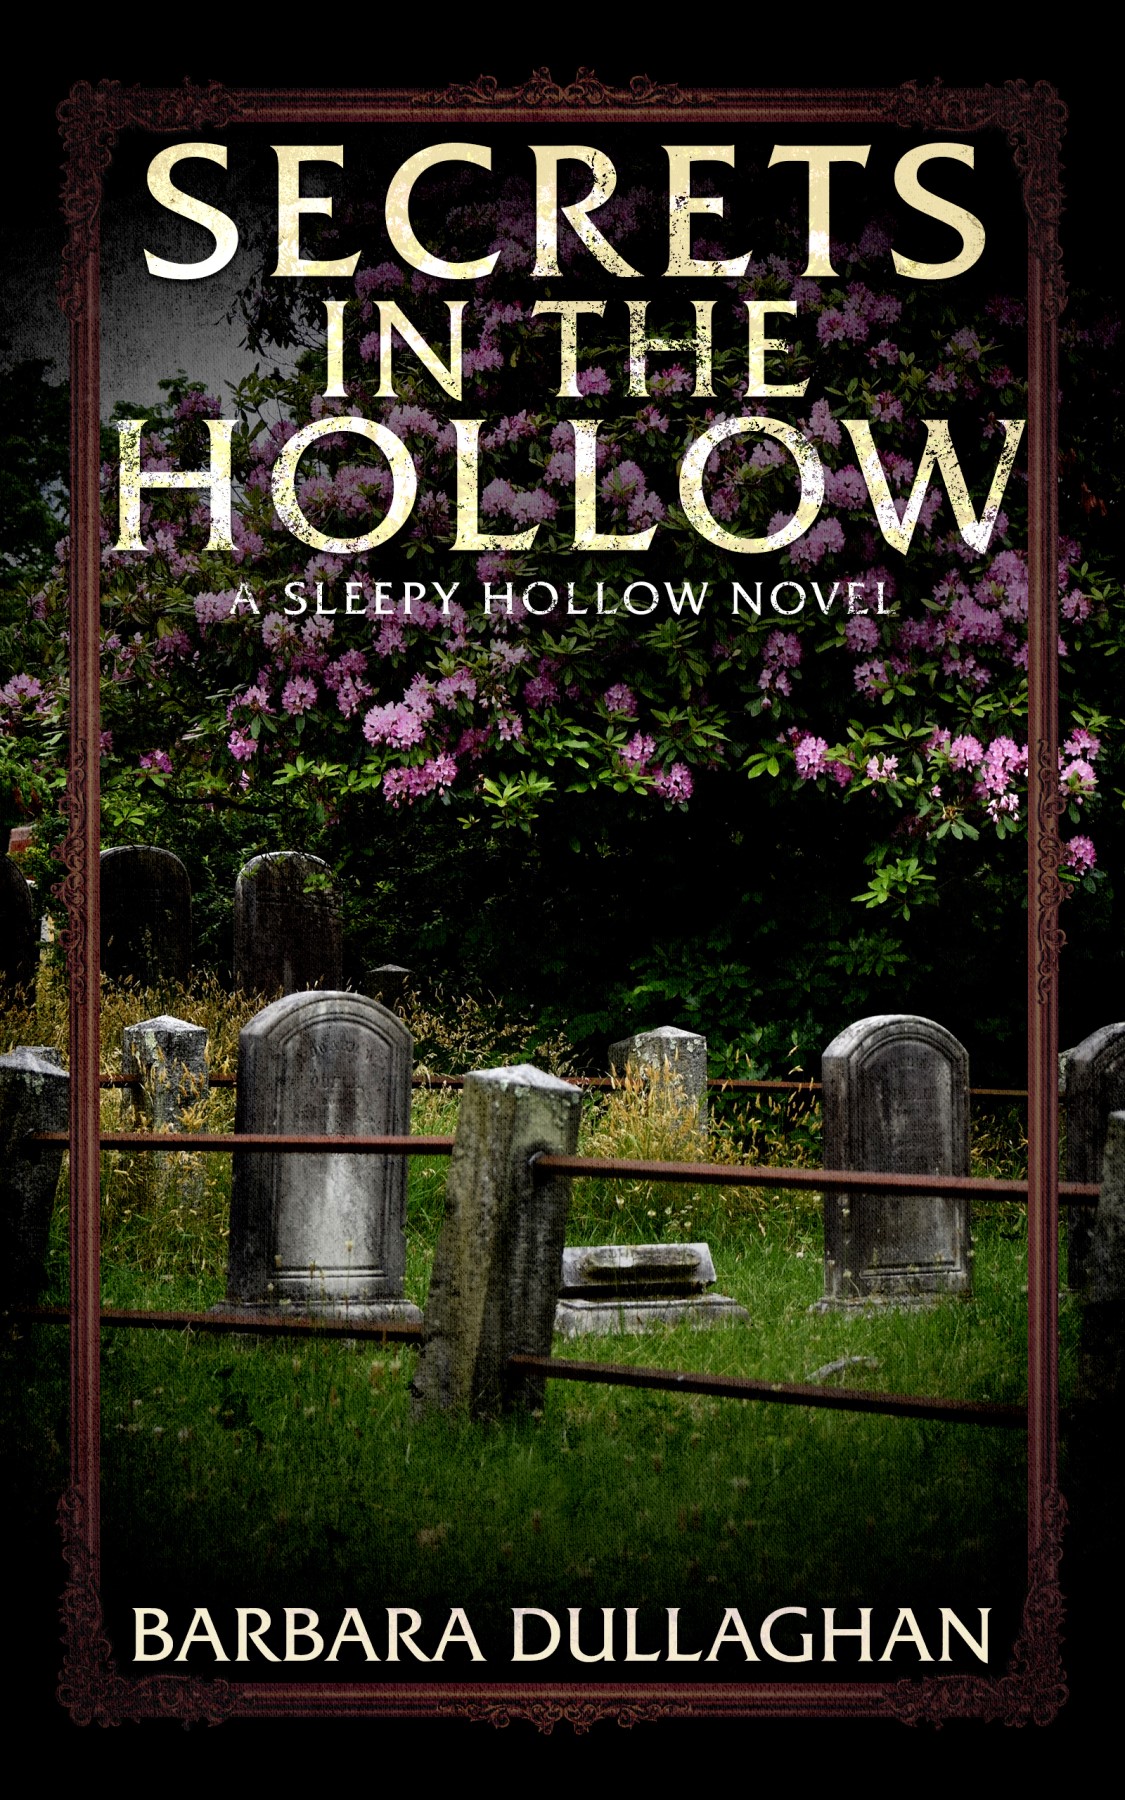 The front cover of Secrets in the Hollow by Barbara Dullaghan